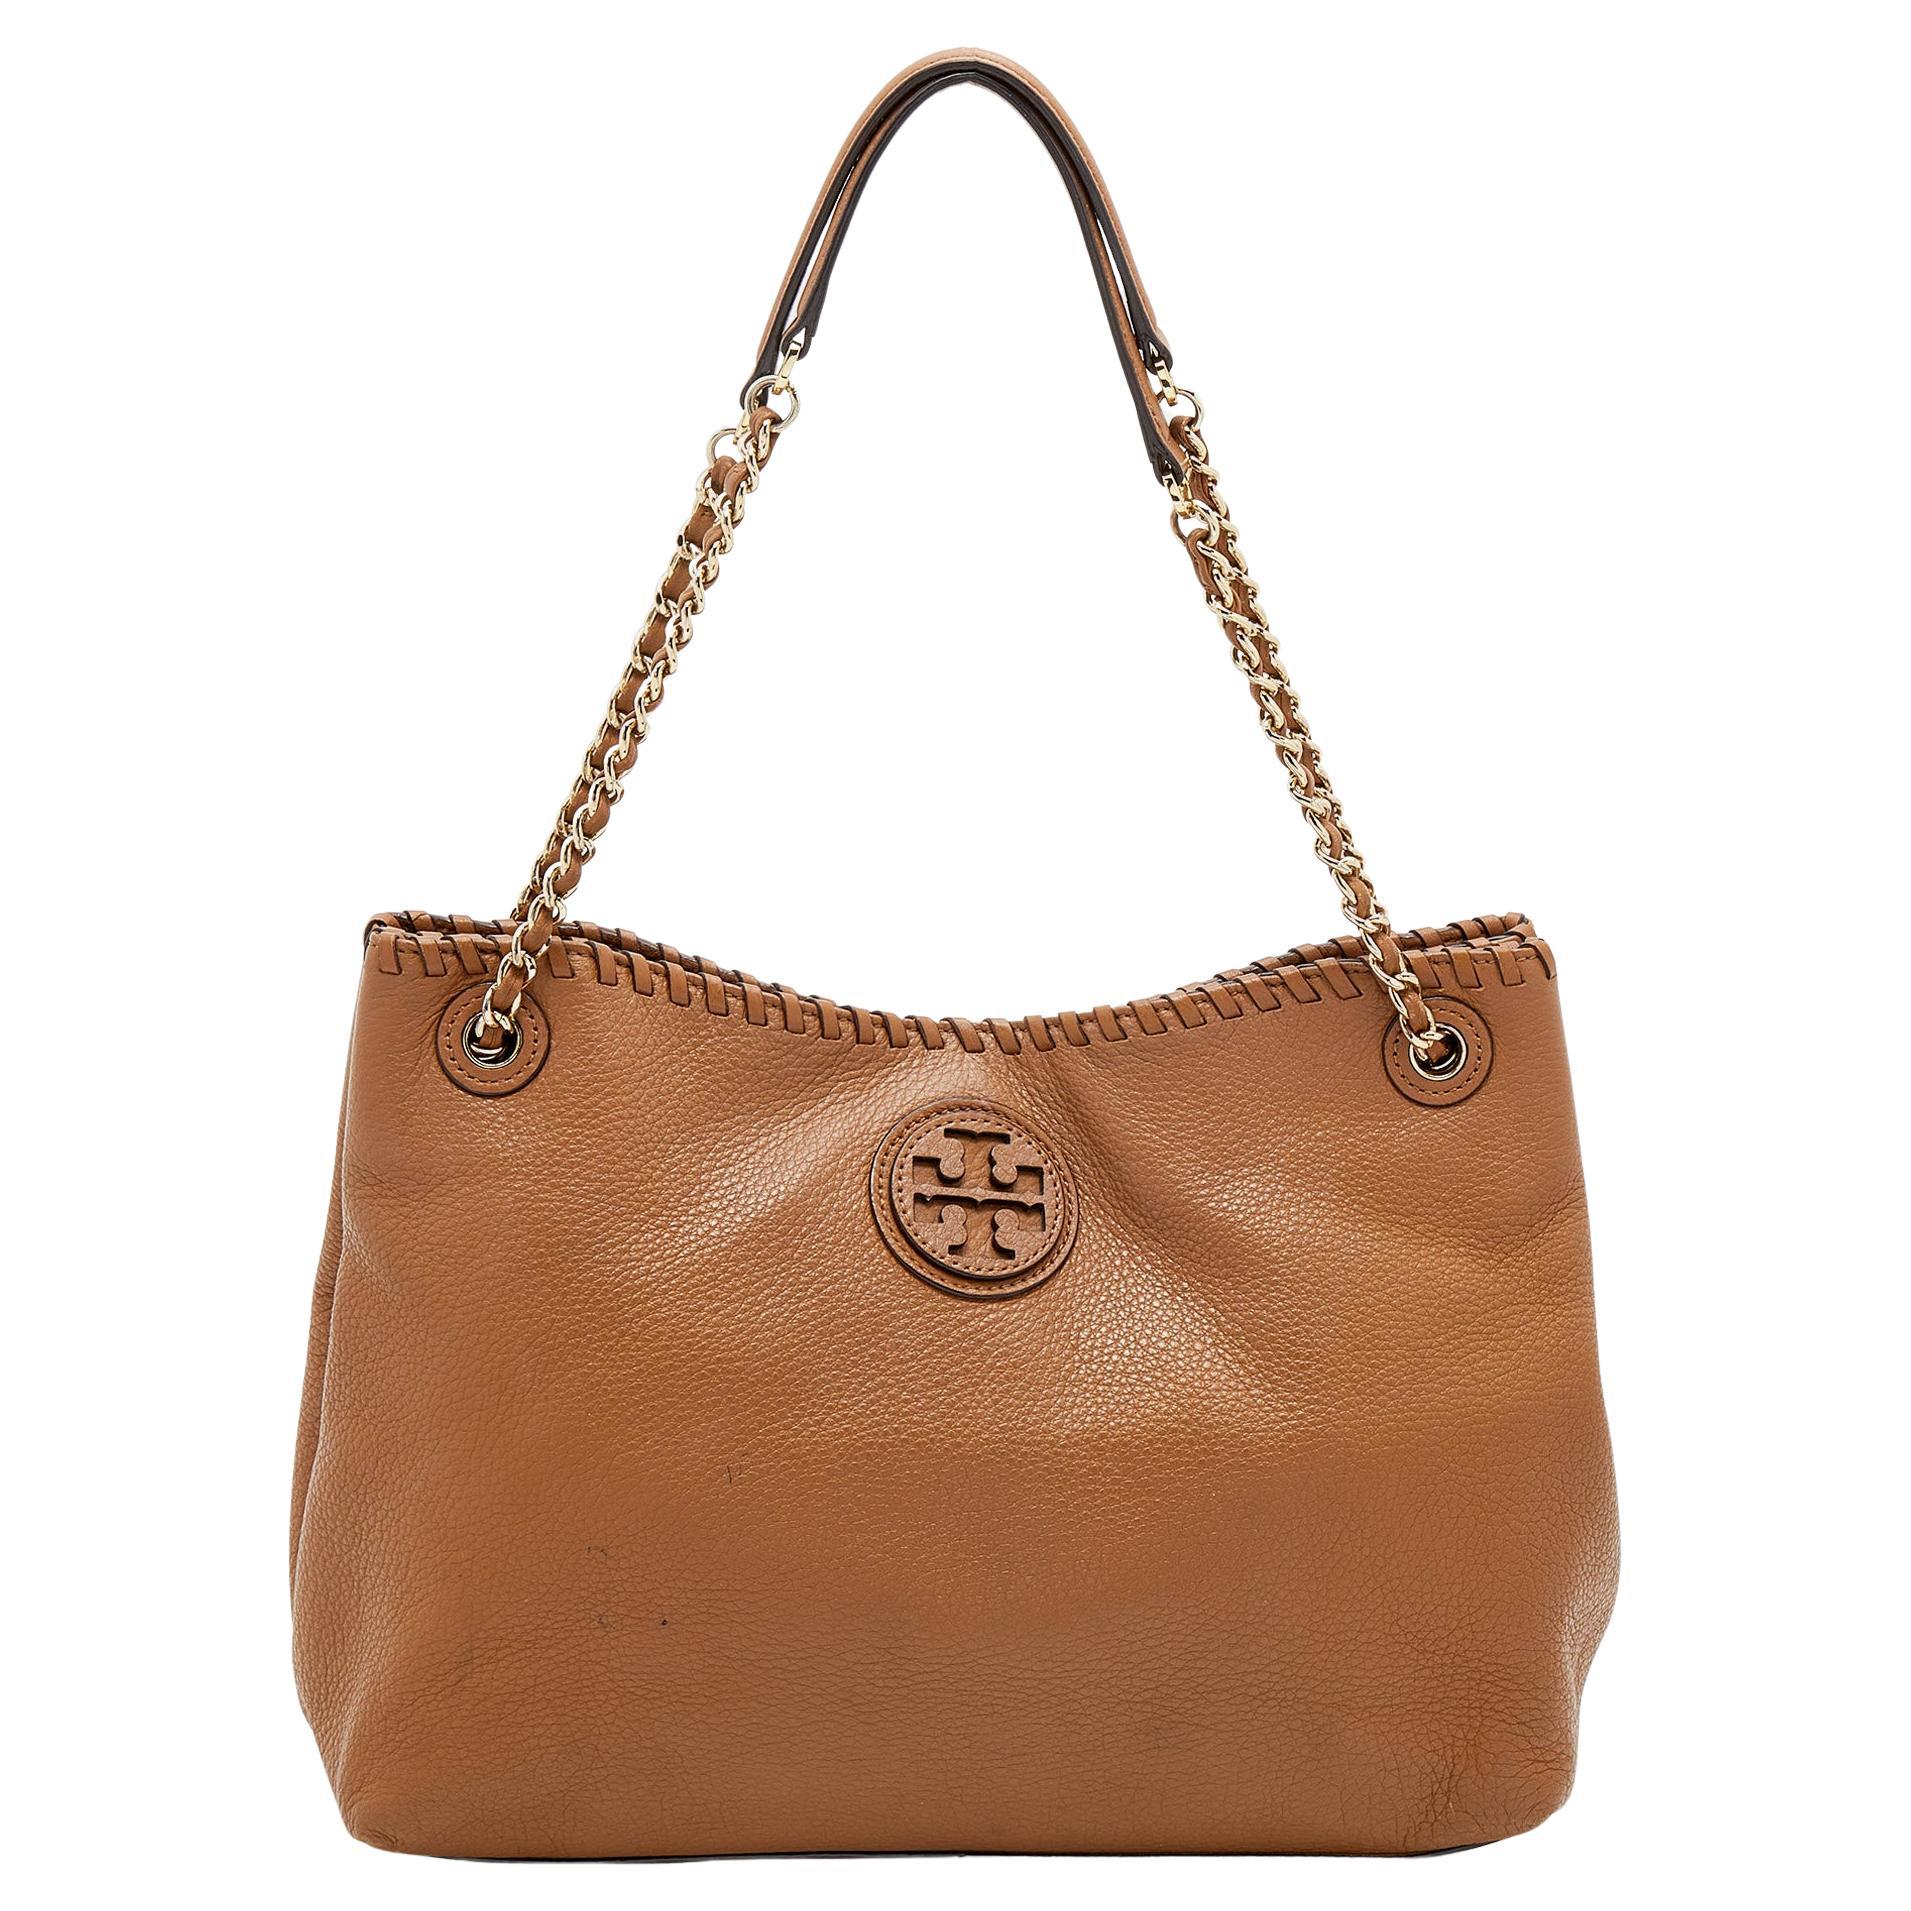 Tory Burch Tan Leather Whipstitch Marion Tote